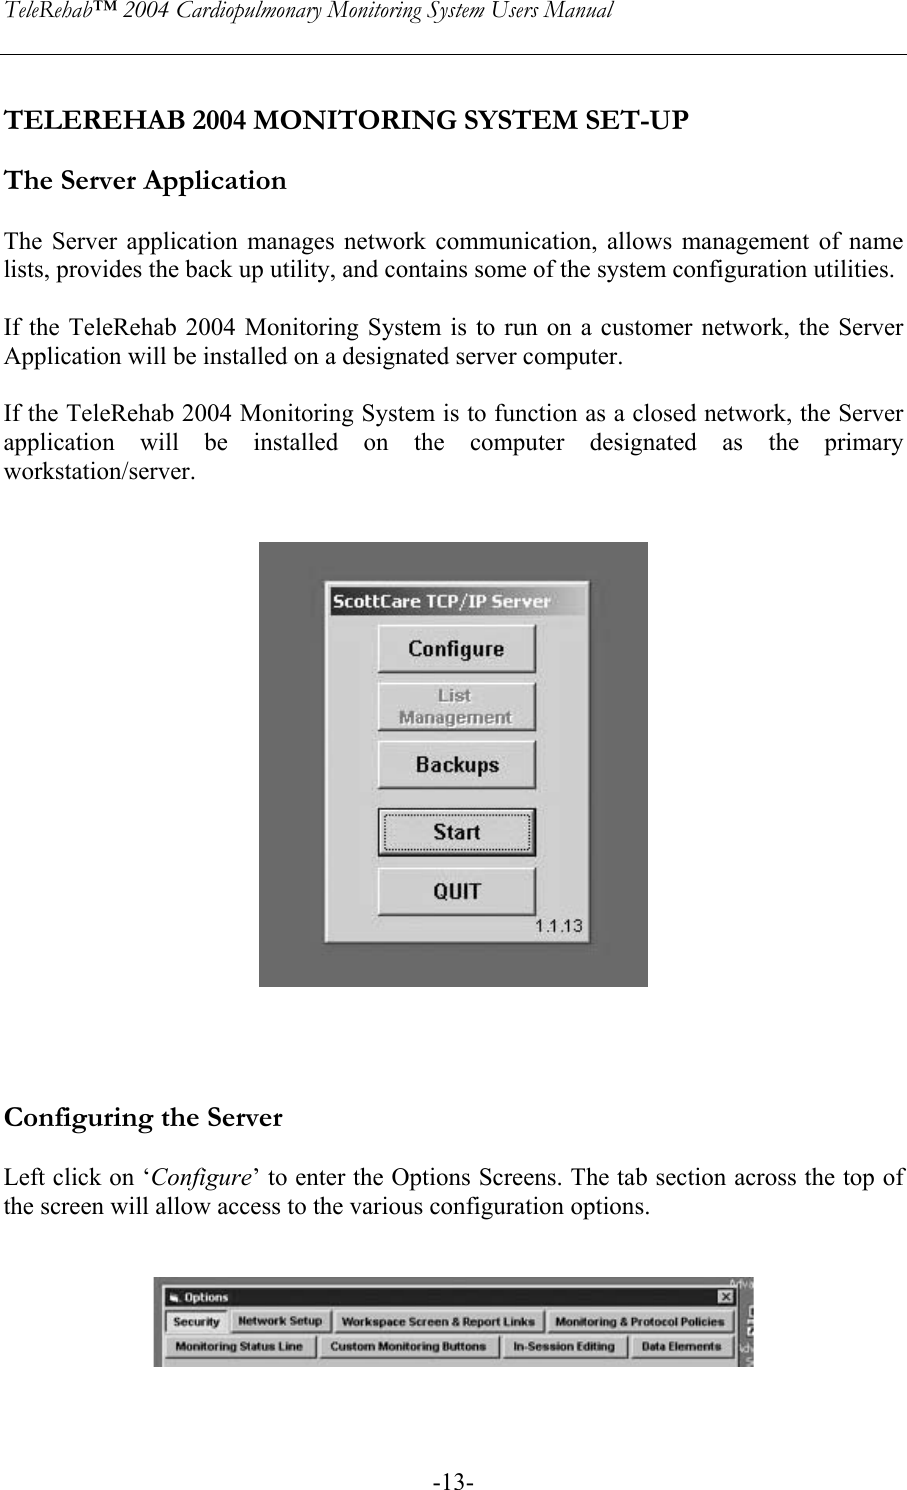 TeleRehab™ 2004 Cardiopulmonary Monitoring System Users Manual    -13- TELEREHAB 2004 MONITORING SYSTEM SET-UP  The Server Application  The Server application manages network communication, allows management of name lists, provides the back up utility, and contains some of the system configuration utilities.  If the TeleRehab 2004 Monitoring System is to run on a customer network, the Server Application will be installed on a designated server computer.   If the TeleRehab 2004 Monitoring System is to function as a closed network, the Server application will be installed on the computer designated as the primary workstation/server.         Configuring the Server  Left click on ‘Configure’ to enter the Options Screens. The tab section across the top of the screen will allow access to the various configuration options.     